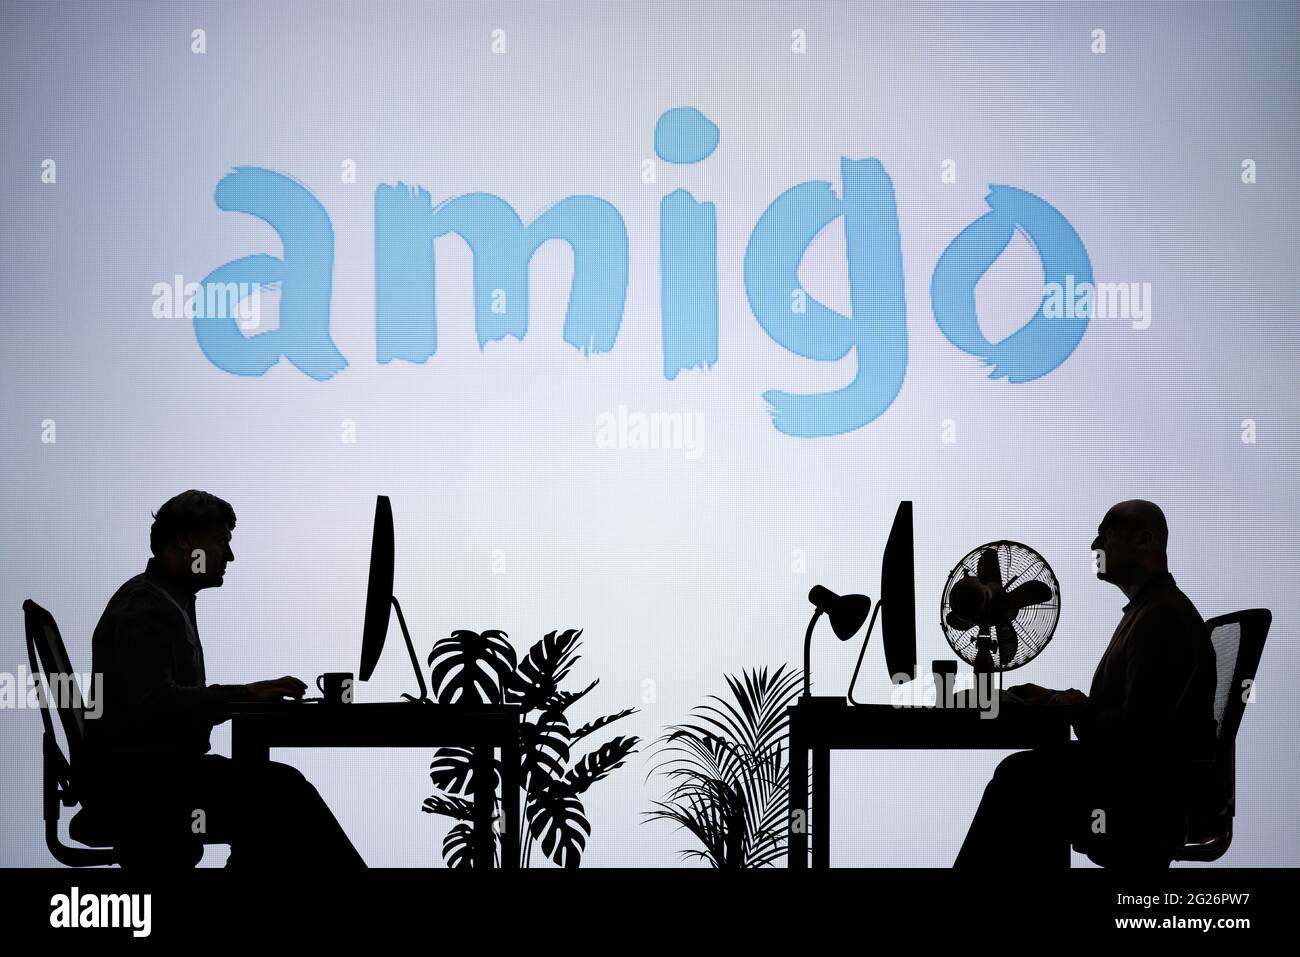 The Amigo Loans logo is seen on an LED screen in the background while two silhouetted people work in an office environment (Editorial use only) Stock Photo